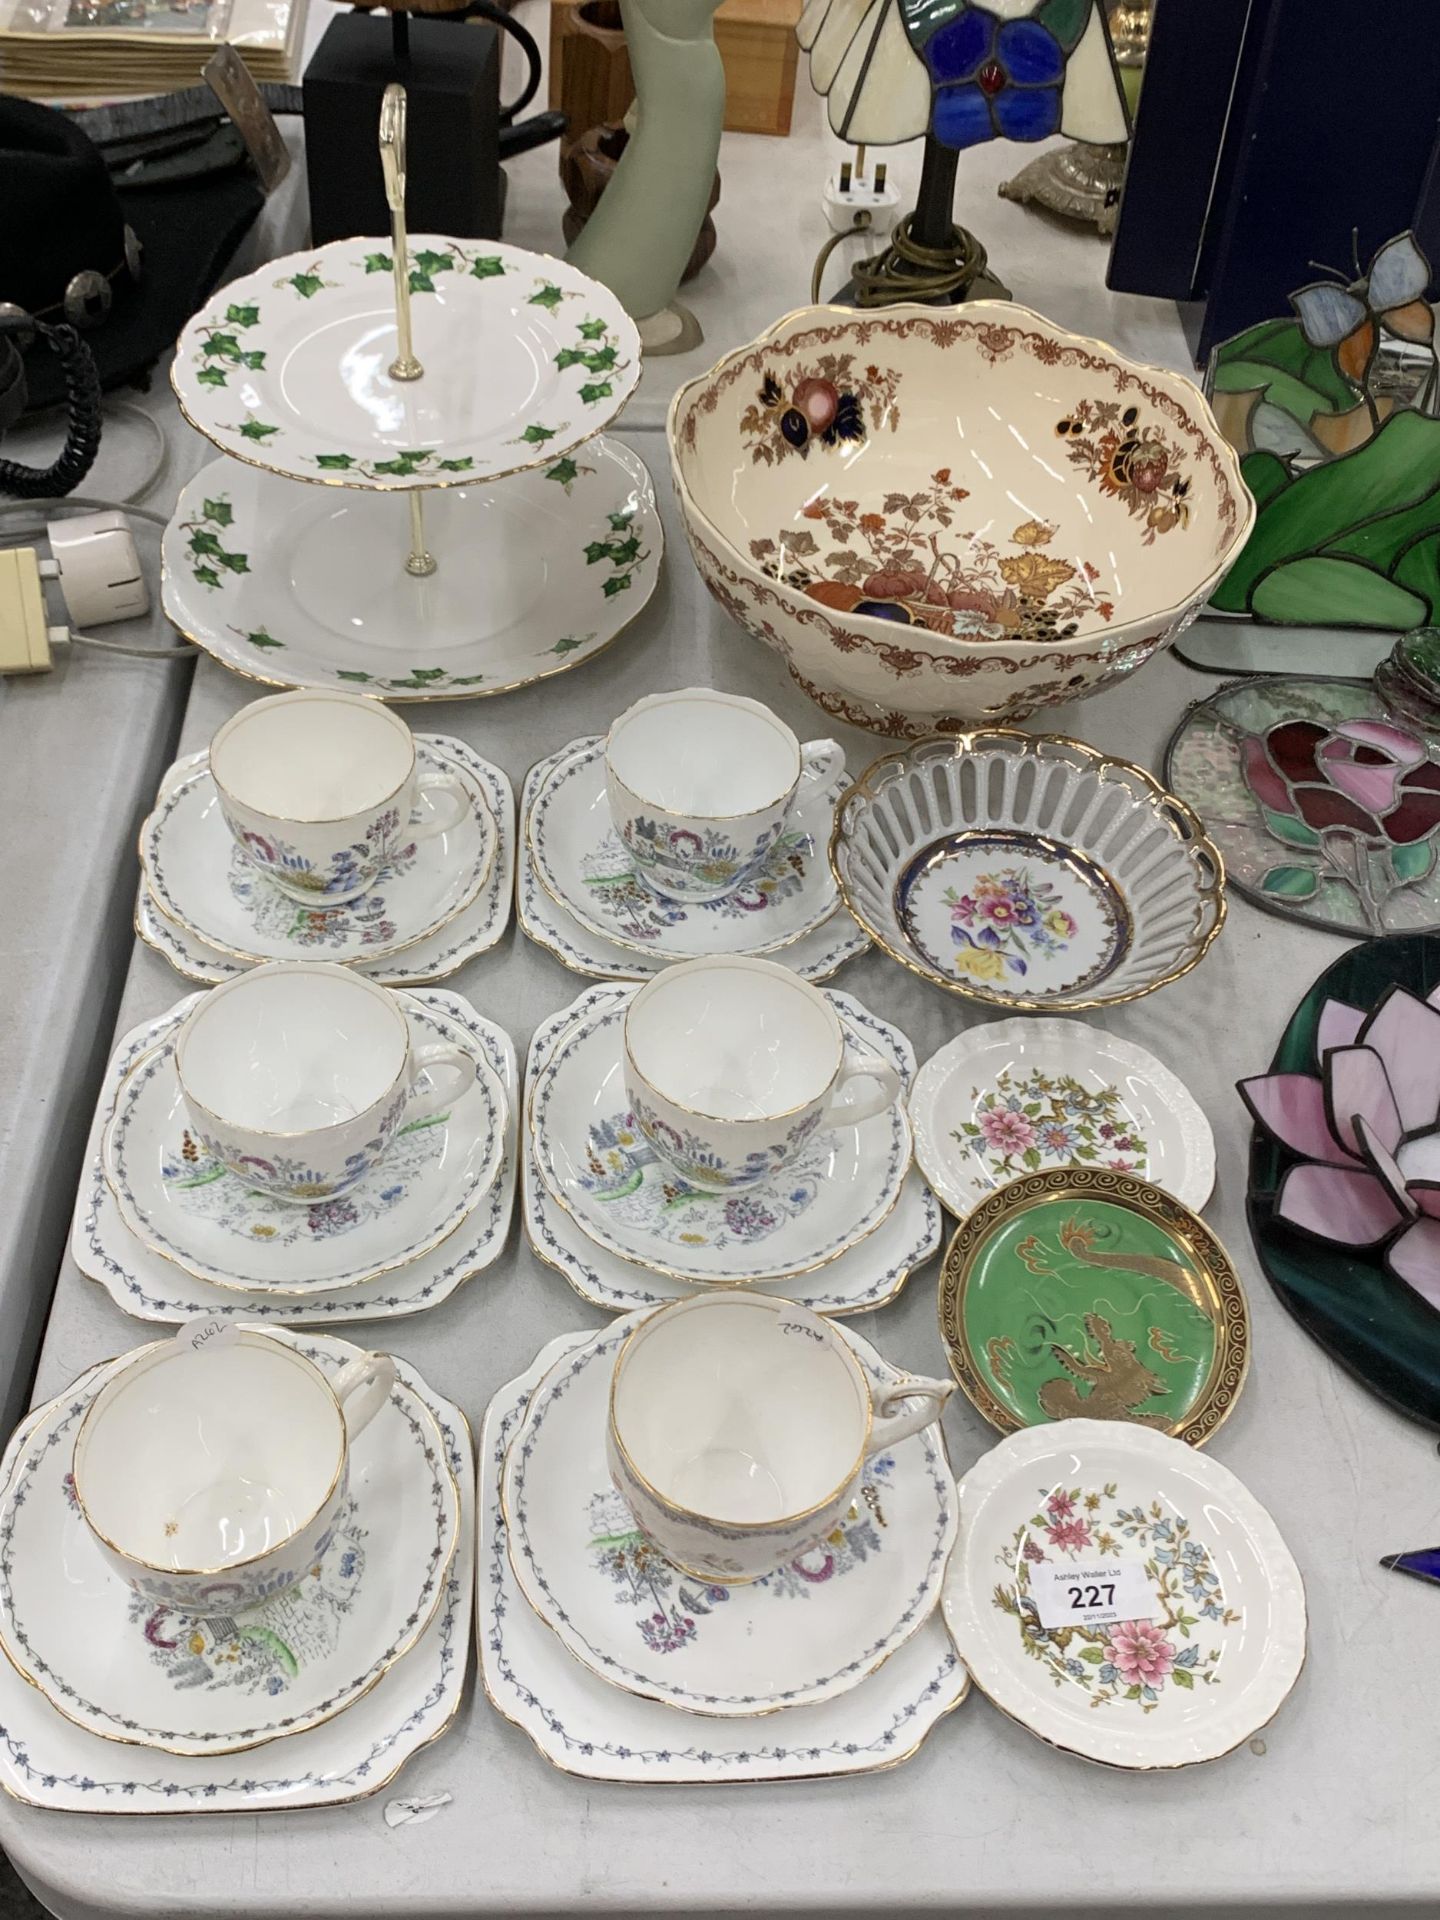 A QUANTITY OF VINTAGE CHINA CUPS AND SAUCERS WITH THE IMAGE OF A LADY IN A GARDEN, A COLCLOUGH